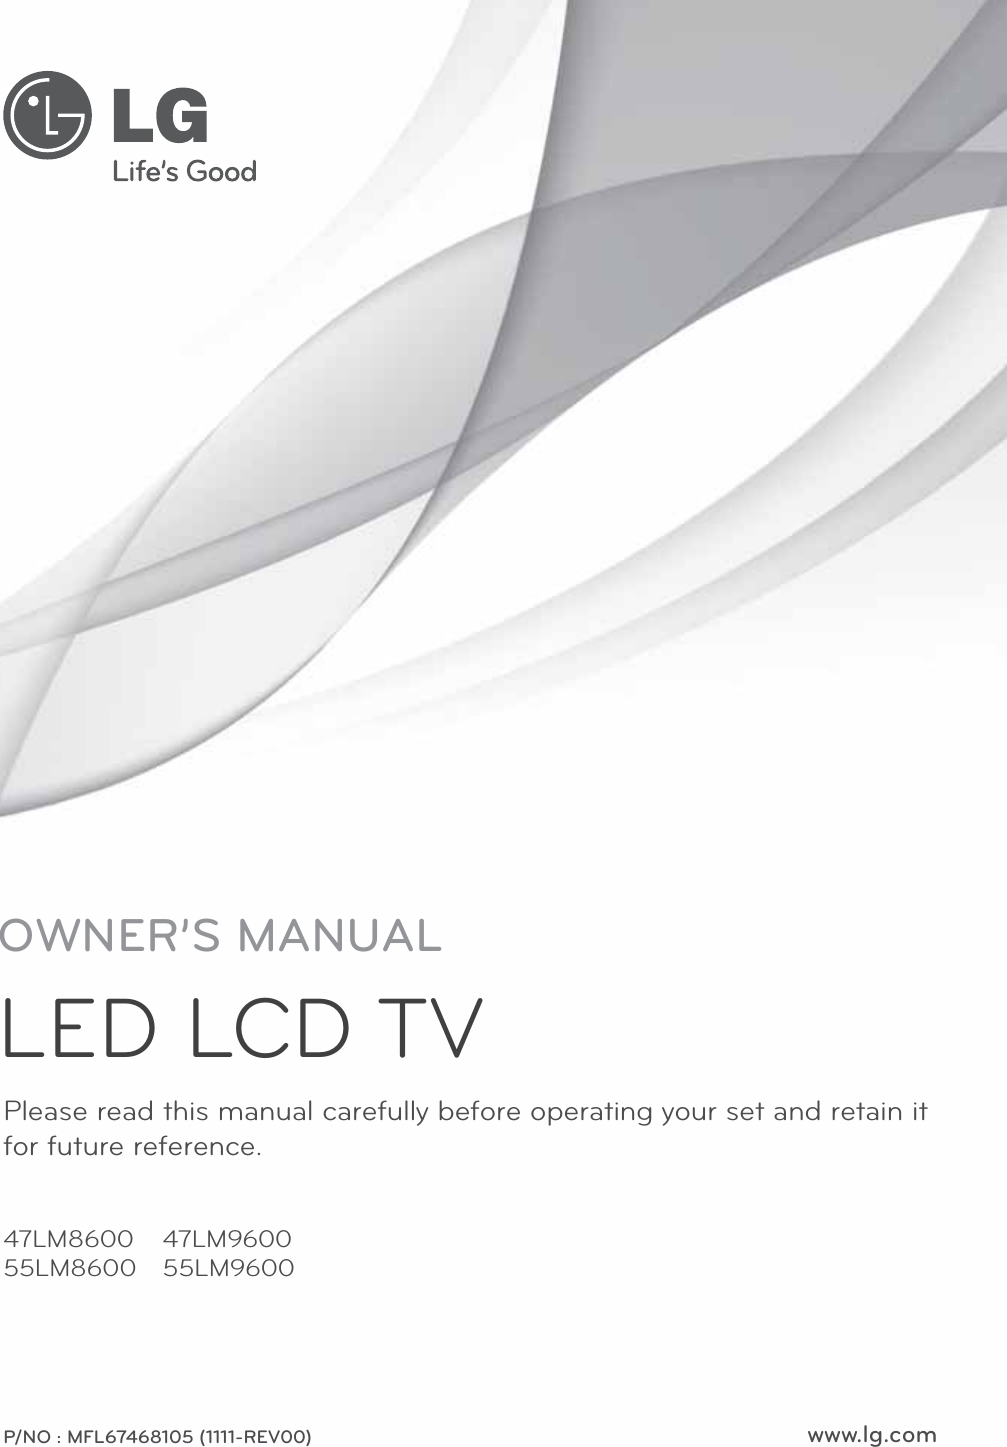 www.lg.comPlease read this manual carefully before operating your set and retain it for future reference.47LM860055LM8600P/NO : MFL67468105 (1111-REV00)47LM960055LM9600OWNER’S MANUALLED LCD TV